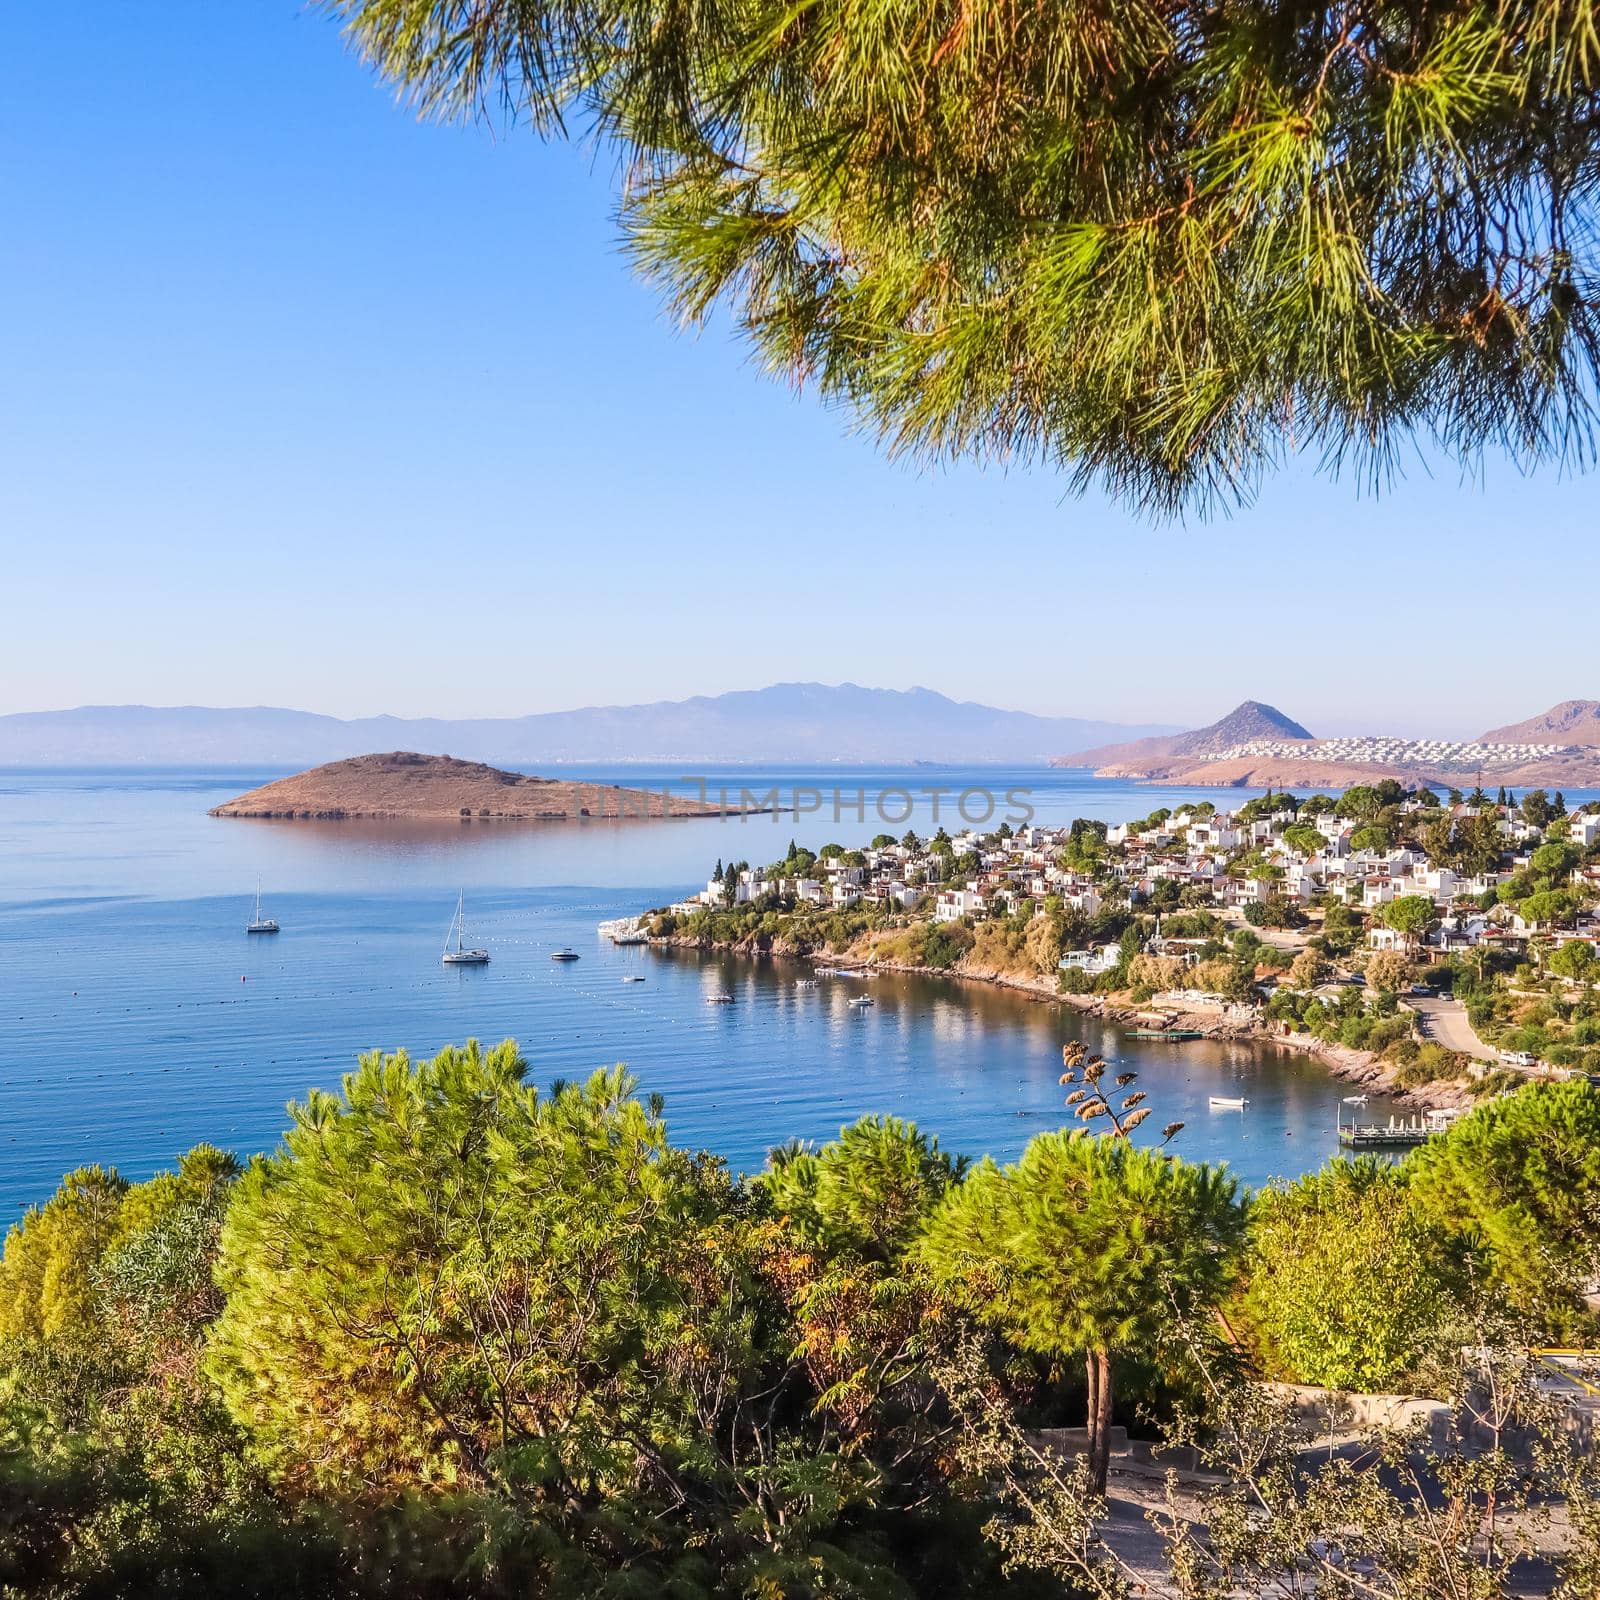 Aegean coast with marvelous blue water, rich nature, islands, mountains and small white houses by Olayola